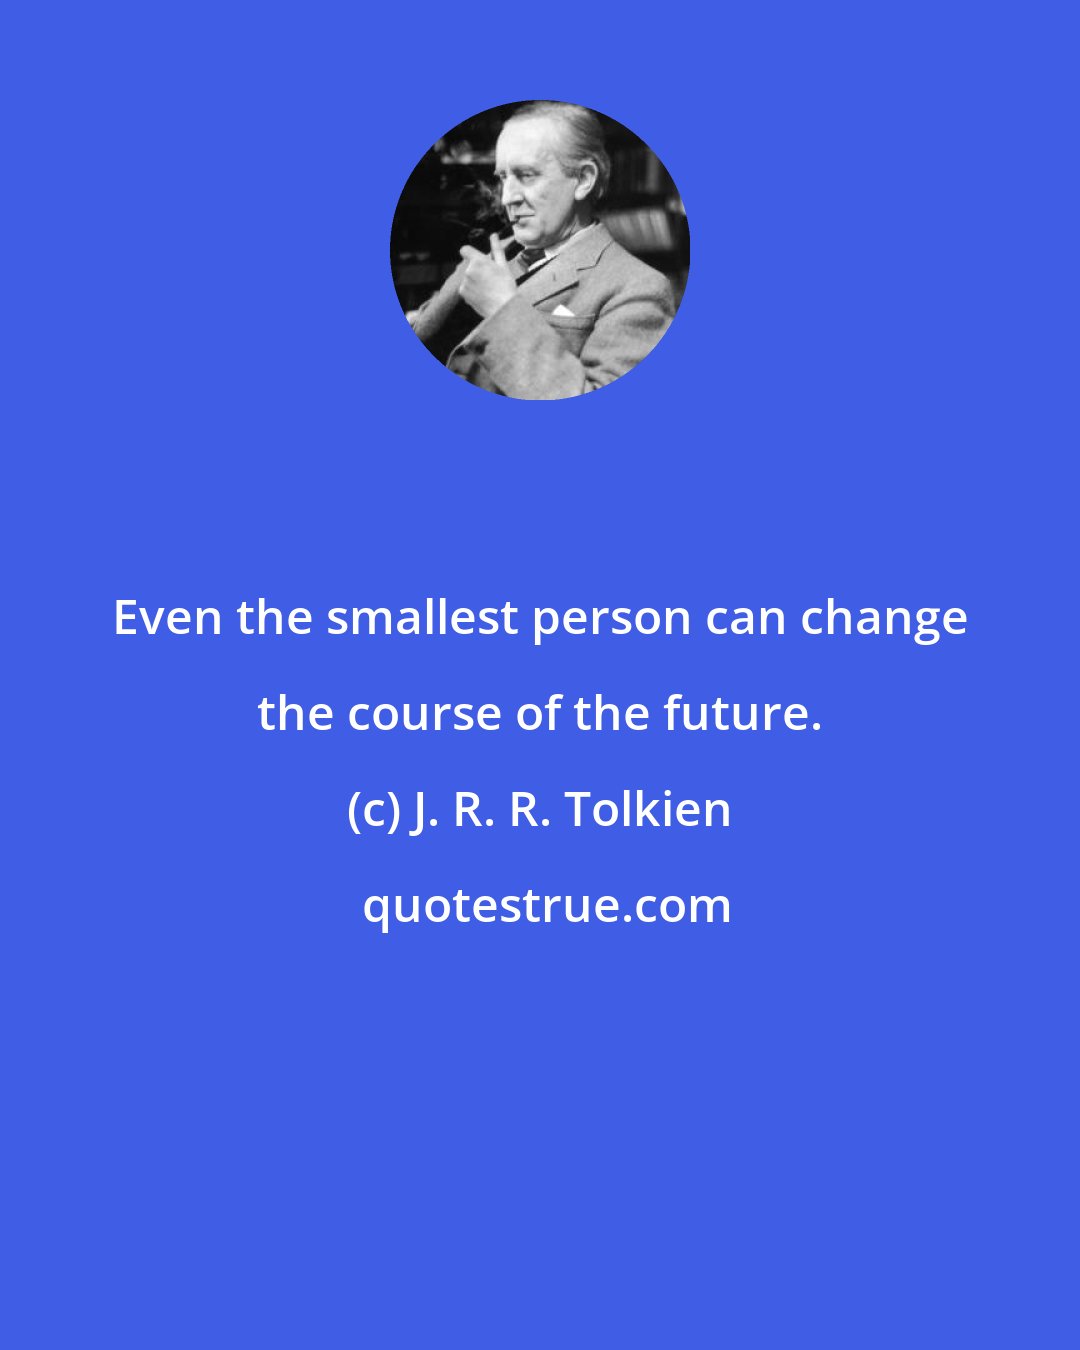 J. R. R. Tolkien: Even the smallest person can change the course of the future.